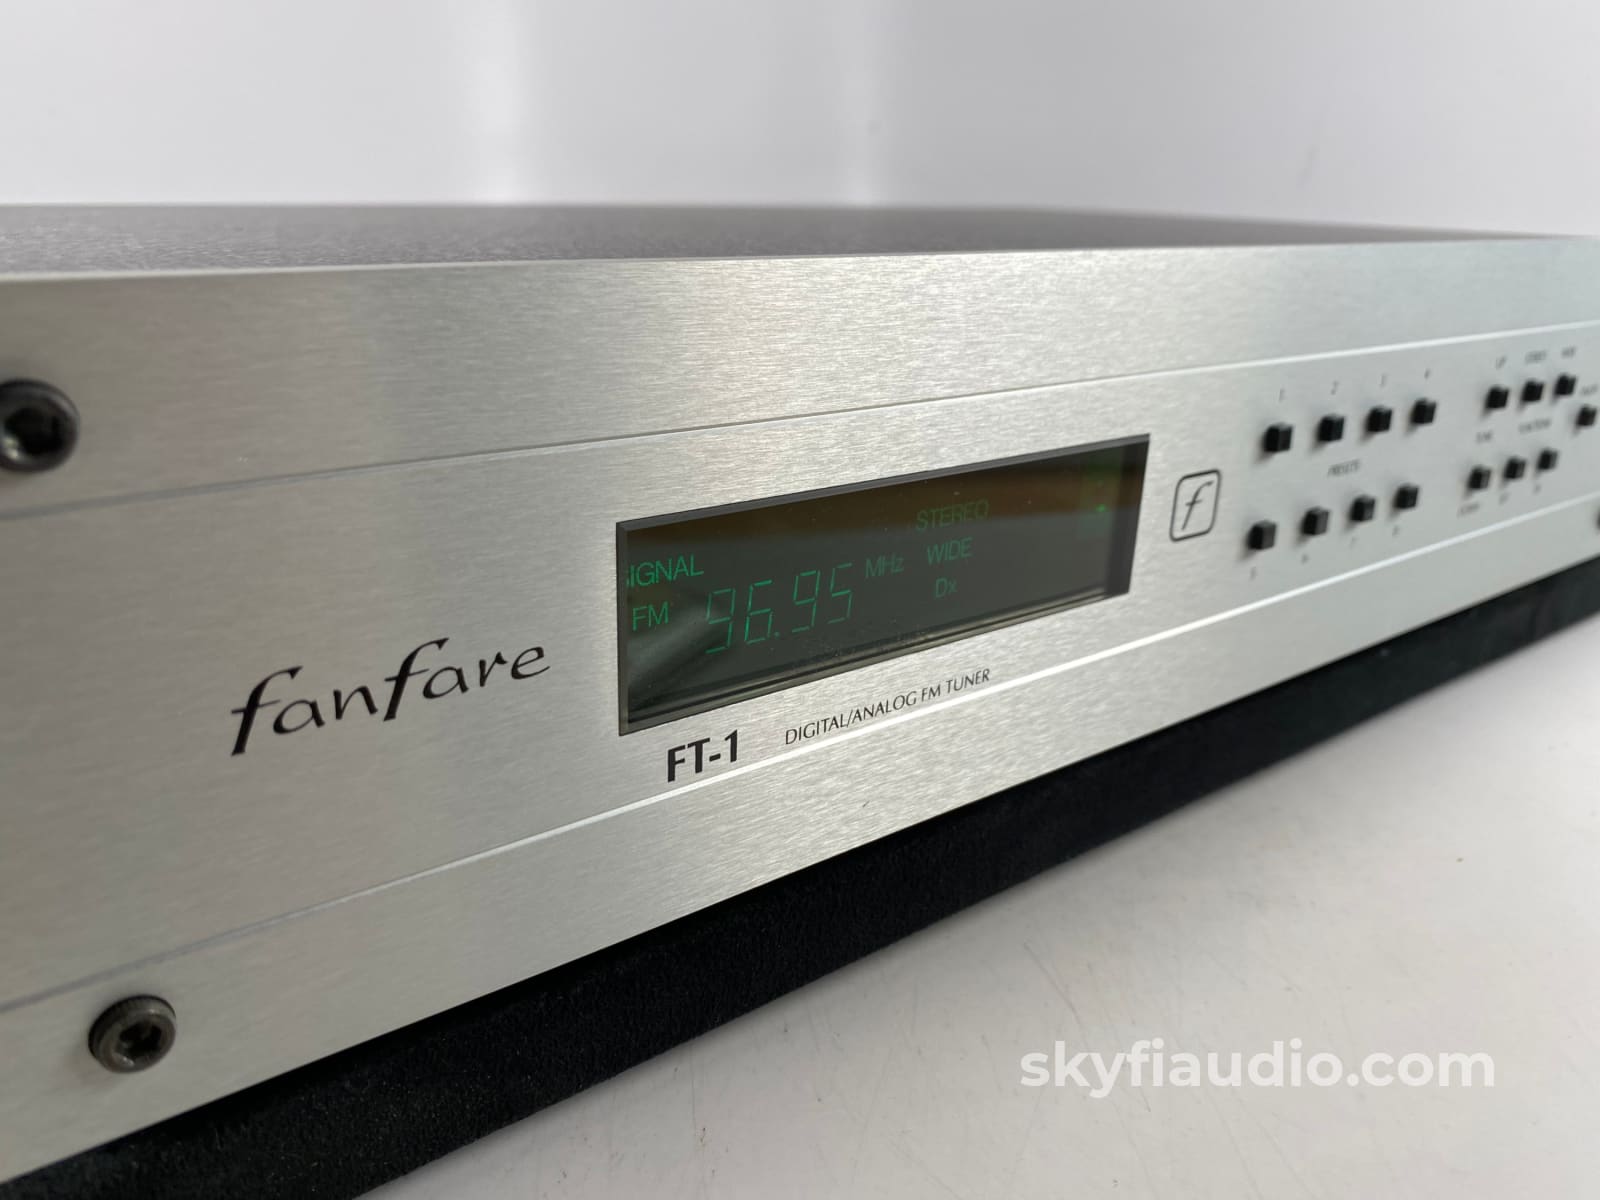 Fanfare Ft-1 Digital/Analog Fm Tuner With Remote Rare Silver Faceplate